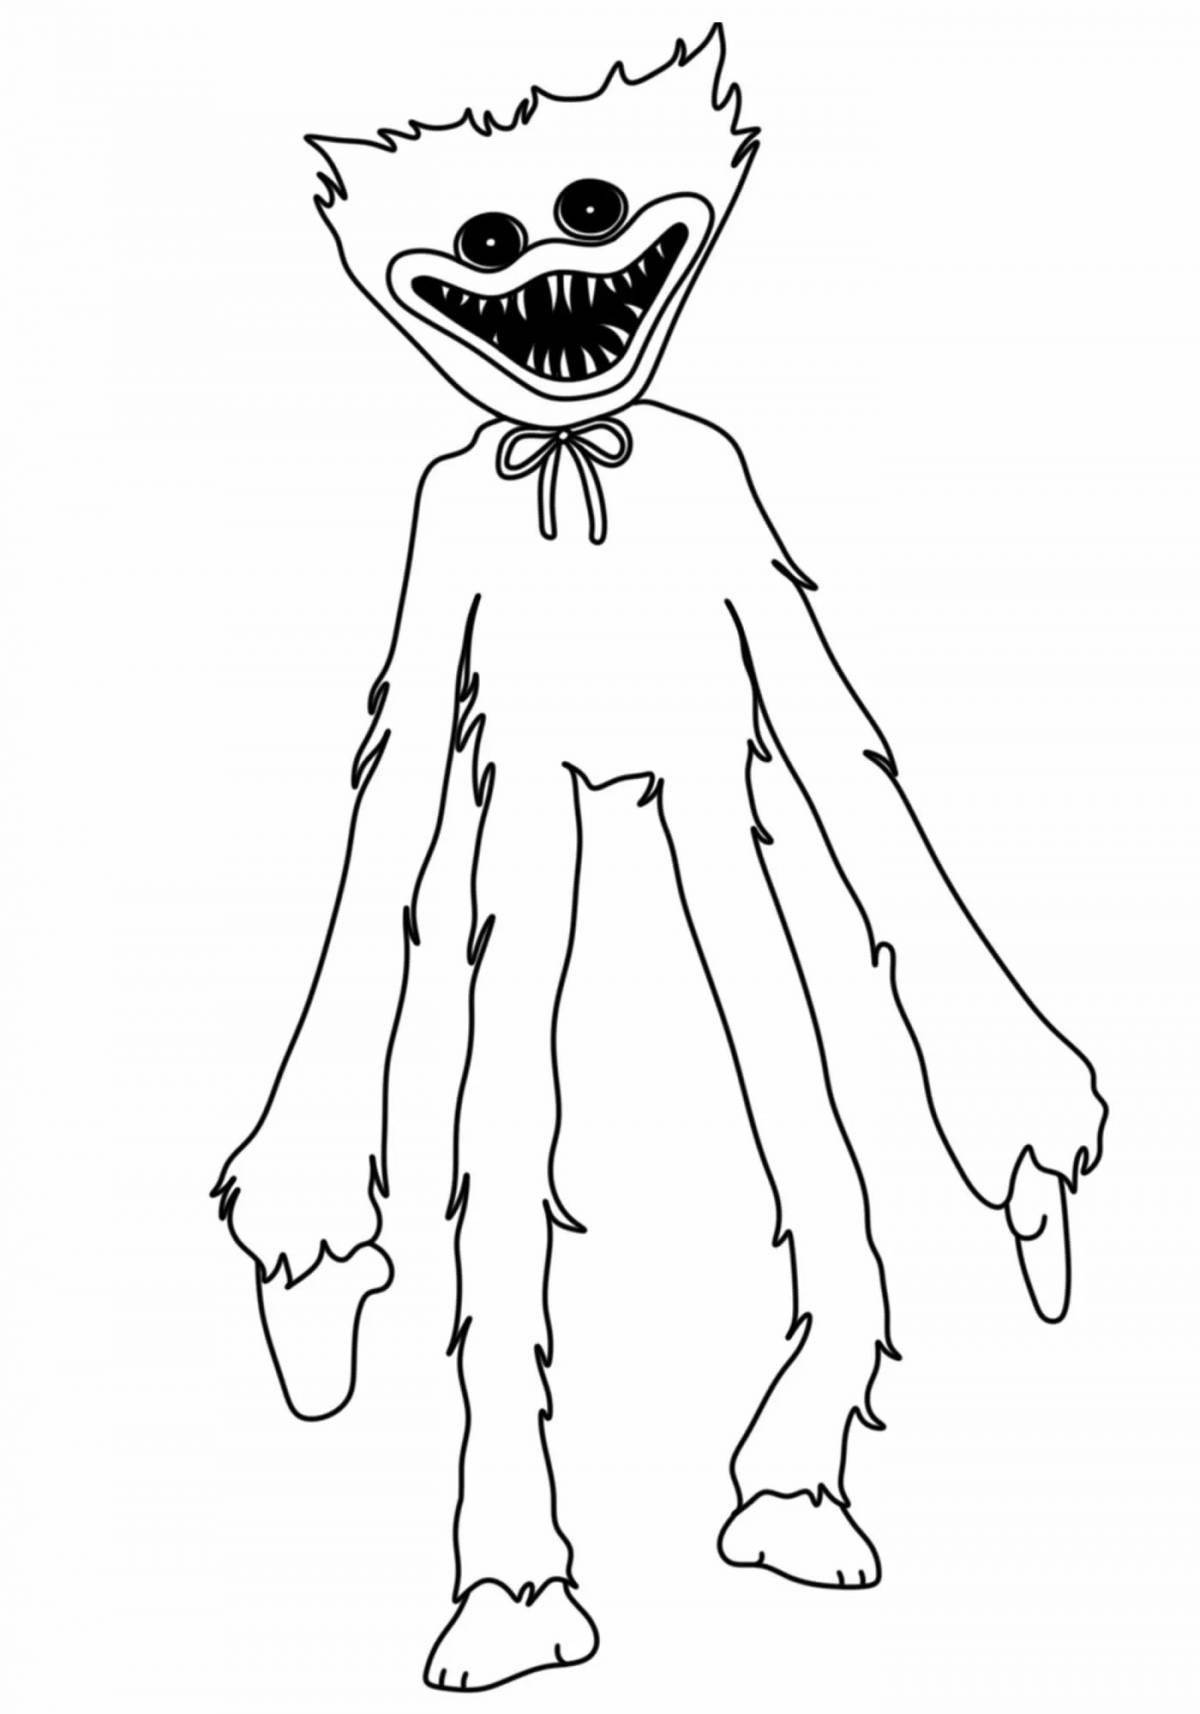 Adorable blue monster coloring page